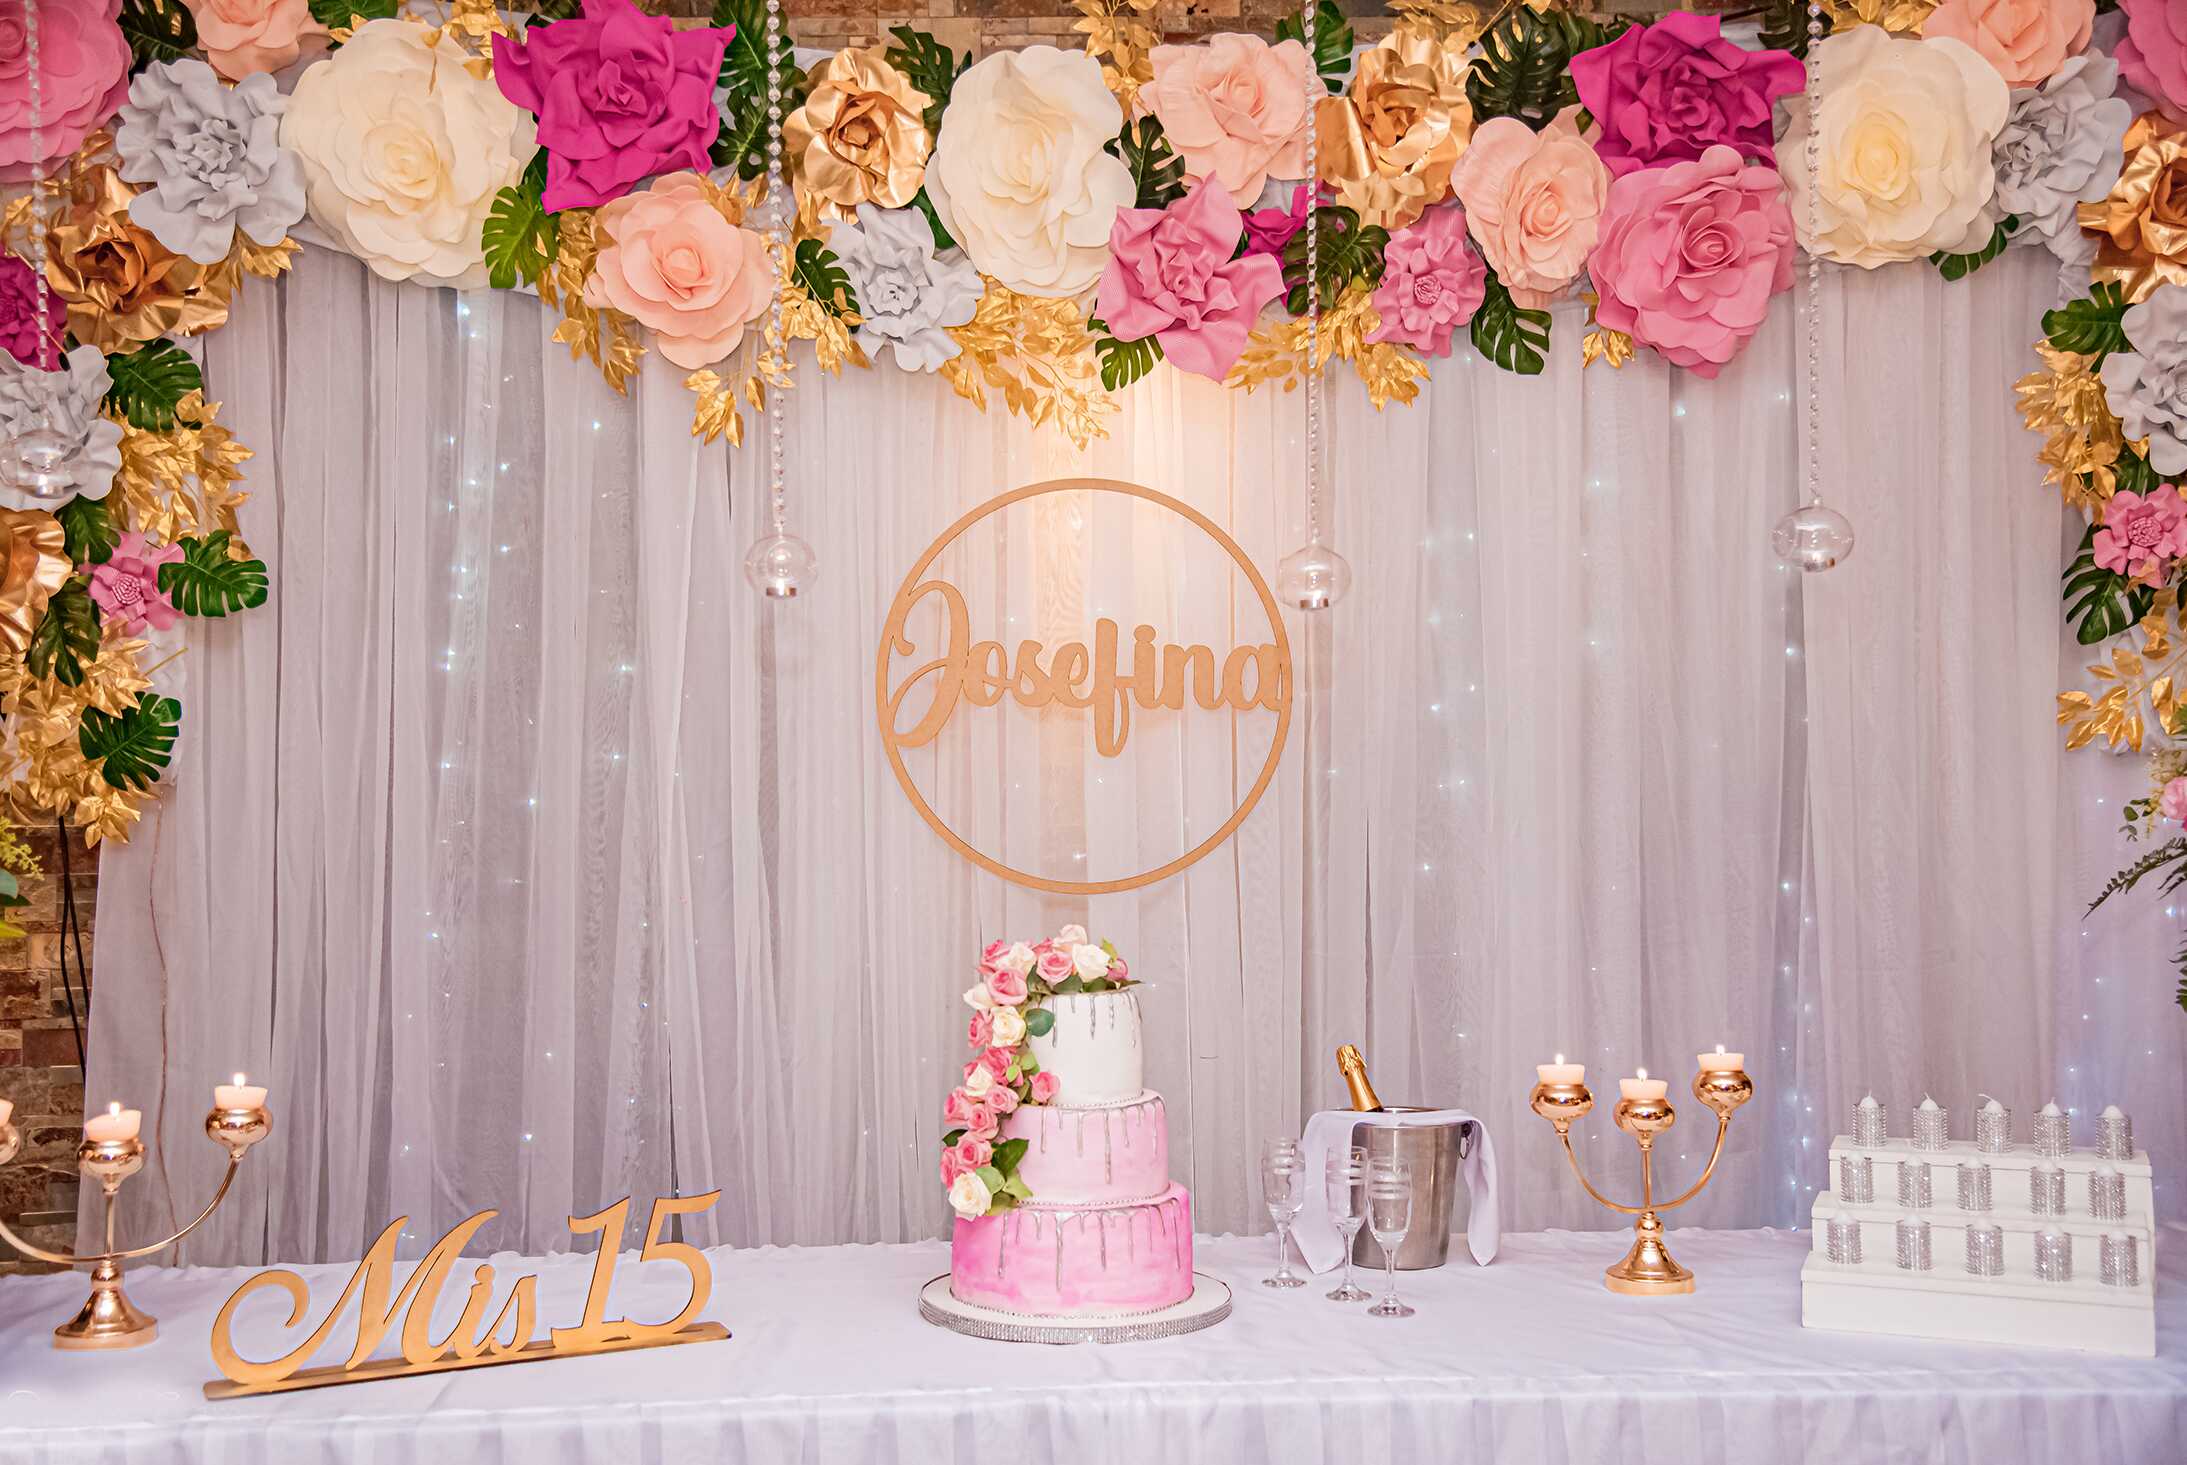 15 Quinceañera Themes and Party Ideas - The Bash